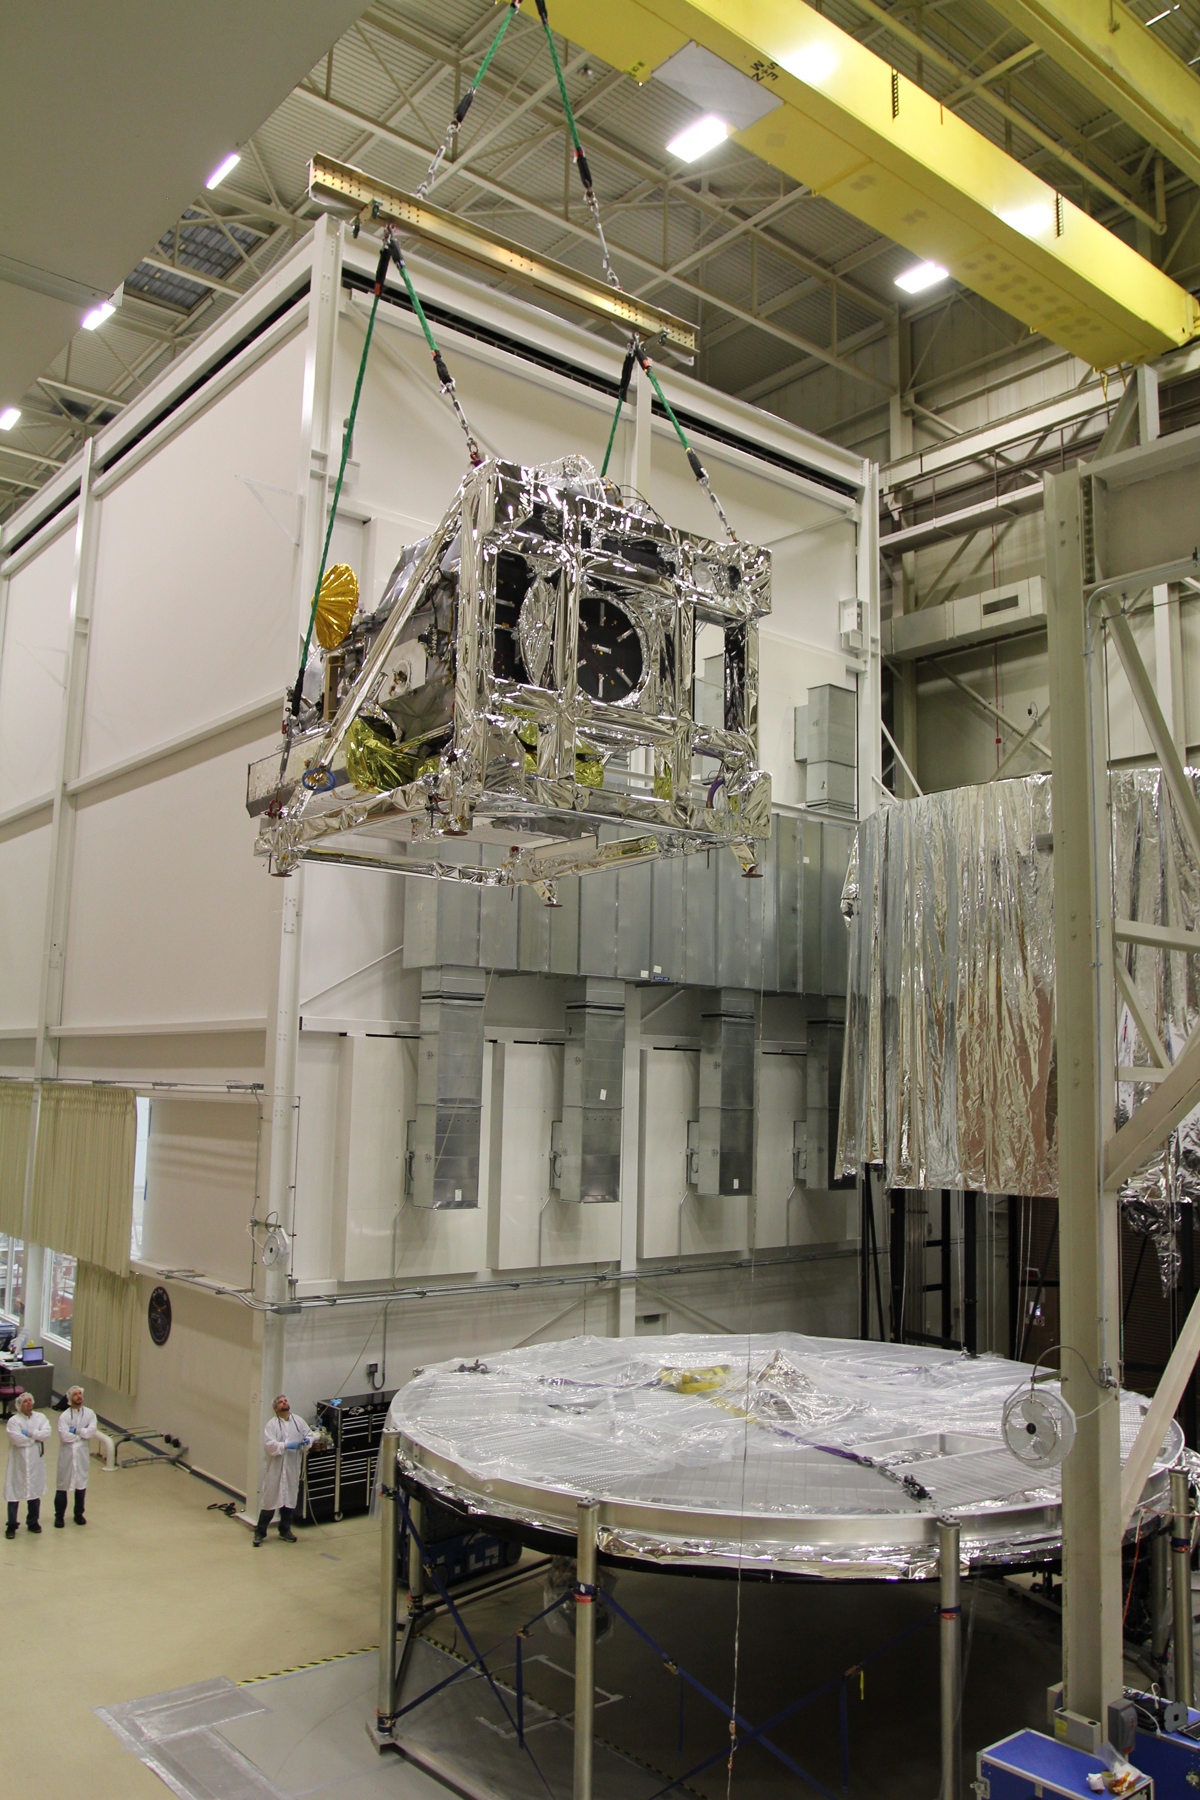 GPM on a cran being lowered into the TVAC chamber